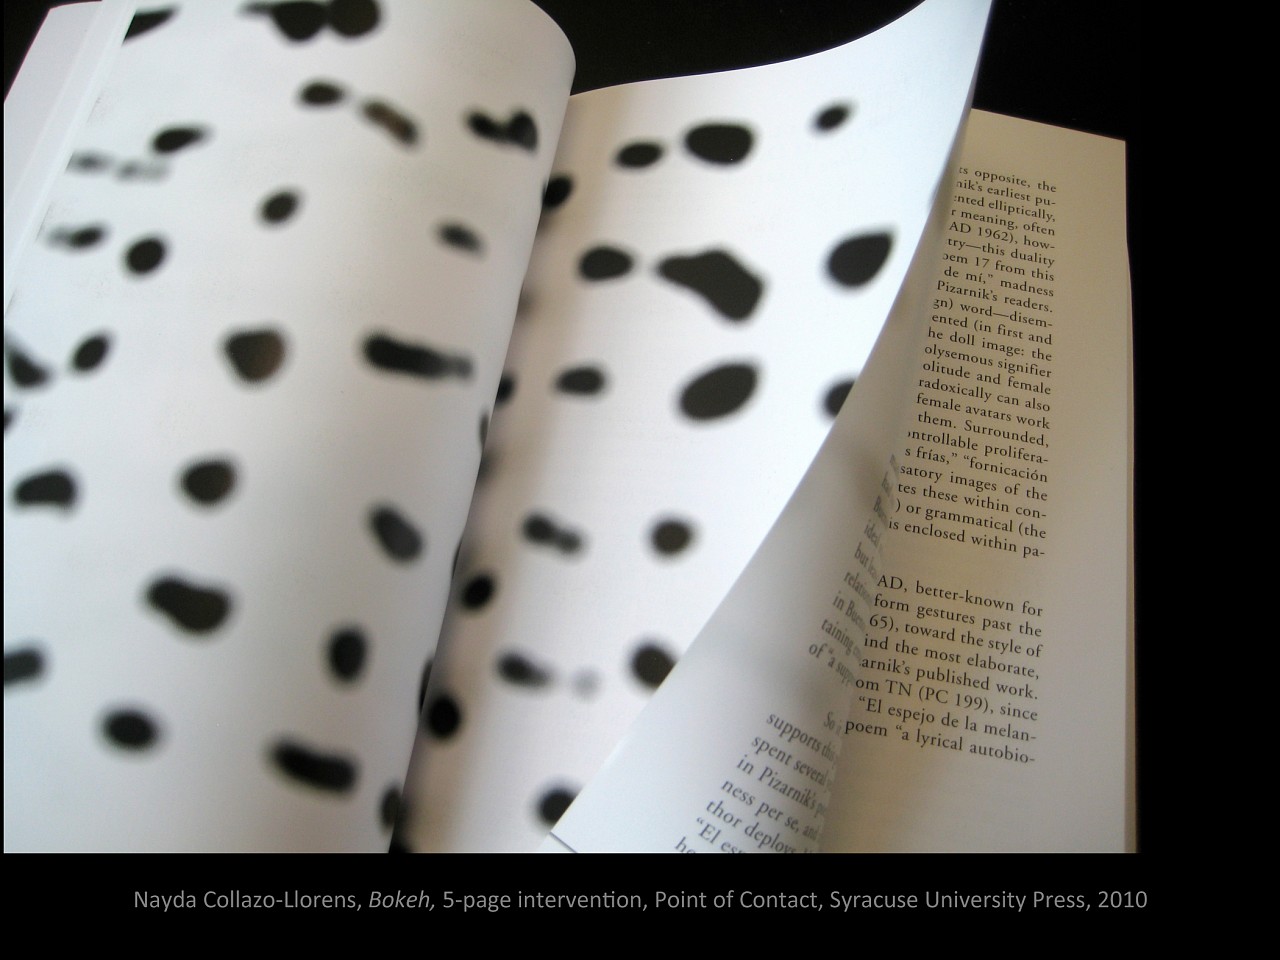 Nayda Collazo-Llorens
Bokeh, 2010
five pages, 9 3/4 x 7 in.